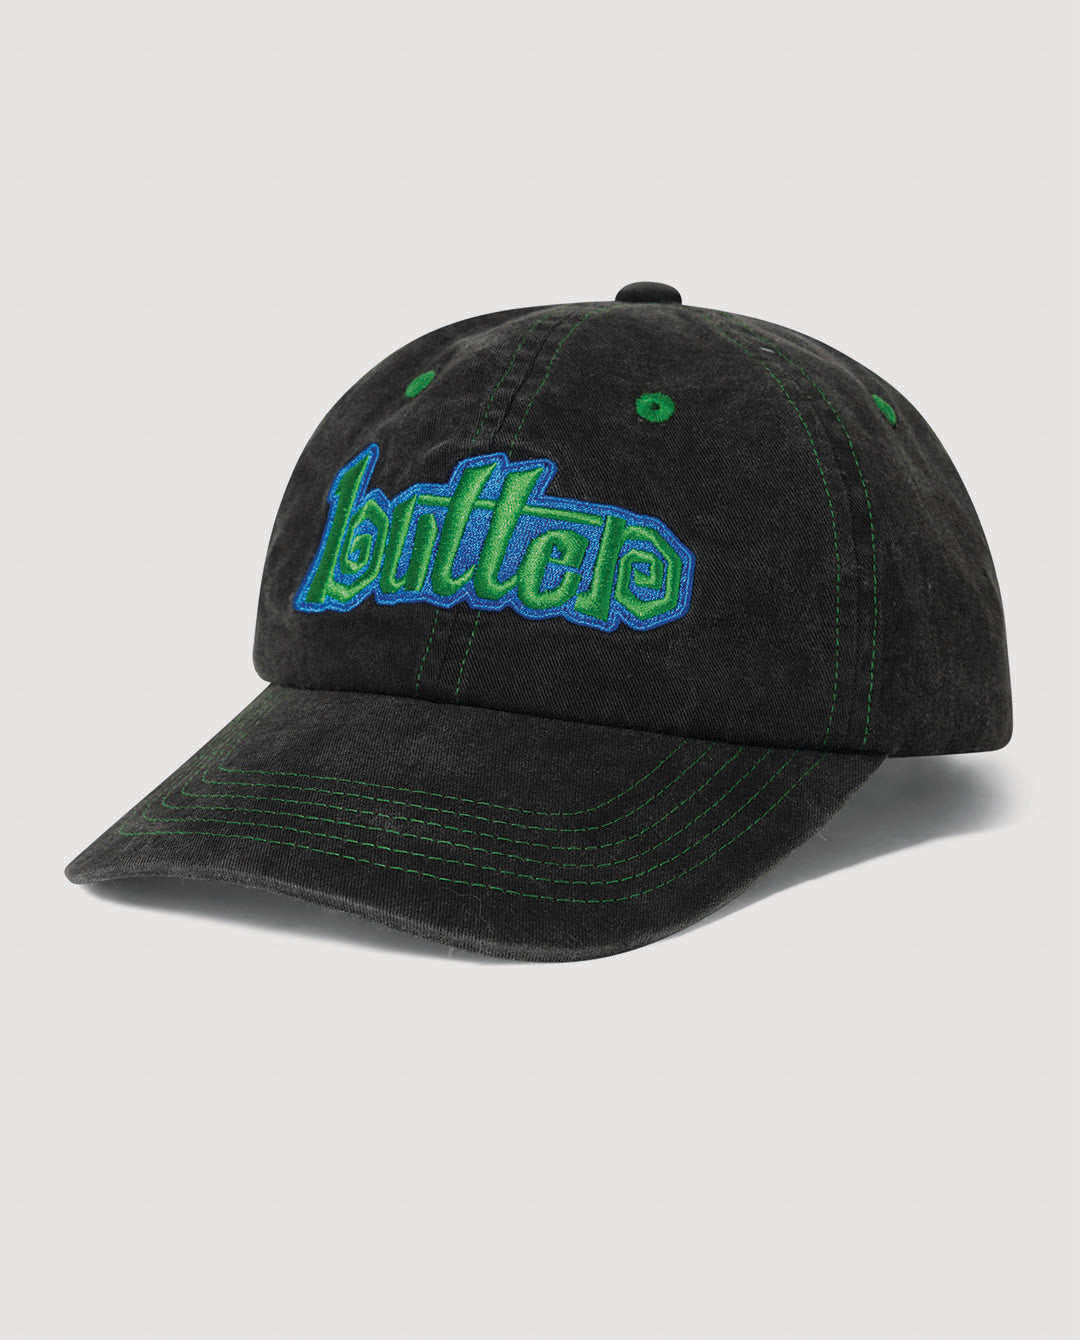 Butter Goods - Swirl 6 Panel Cap - Washed Black